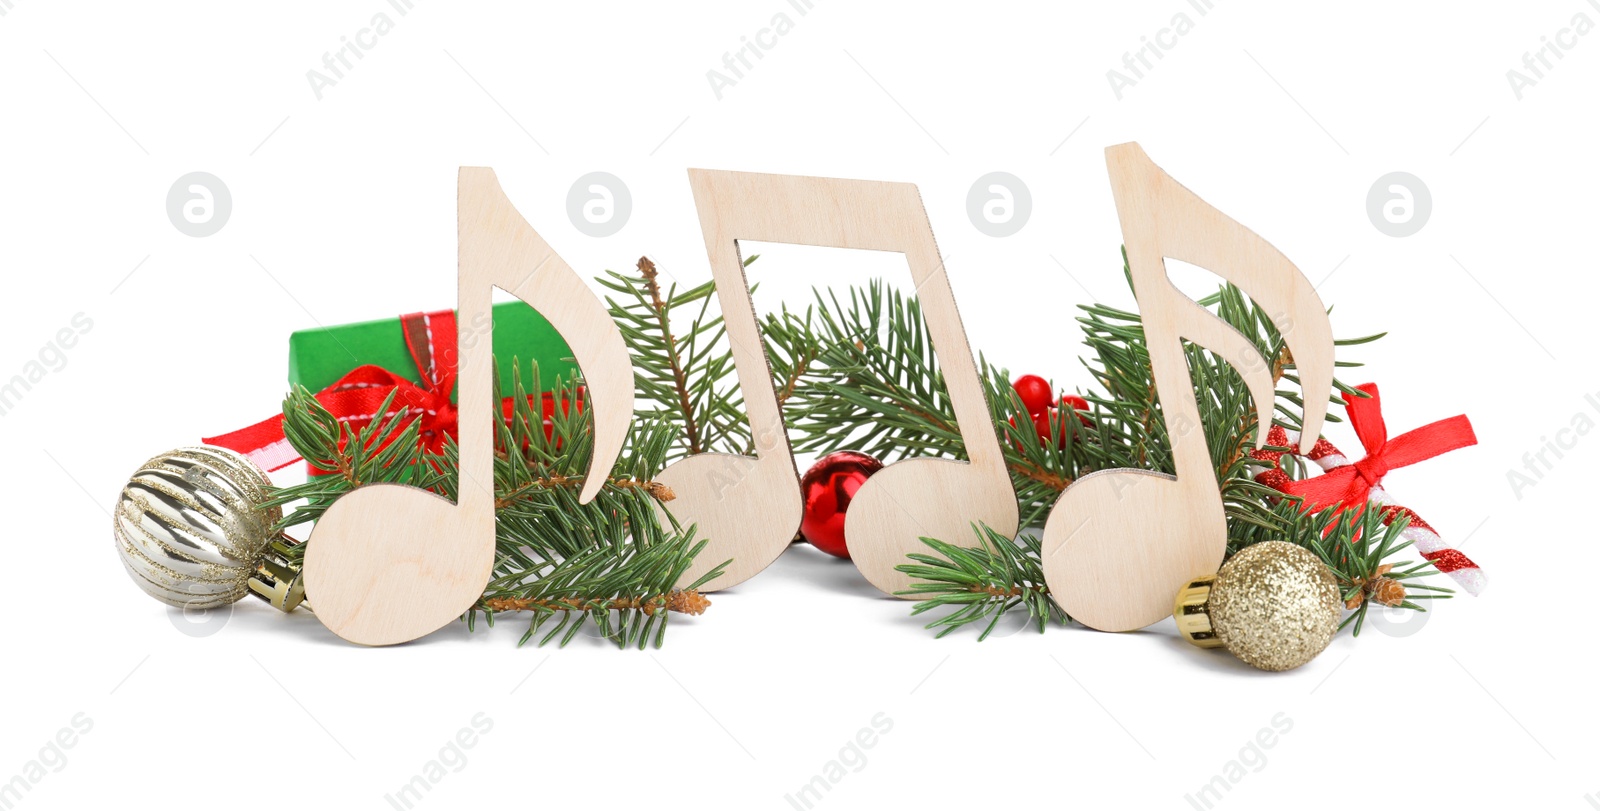 Photo of Wooden music notes with fir tree branches and Christmas decor on white background